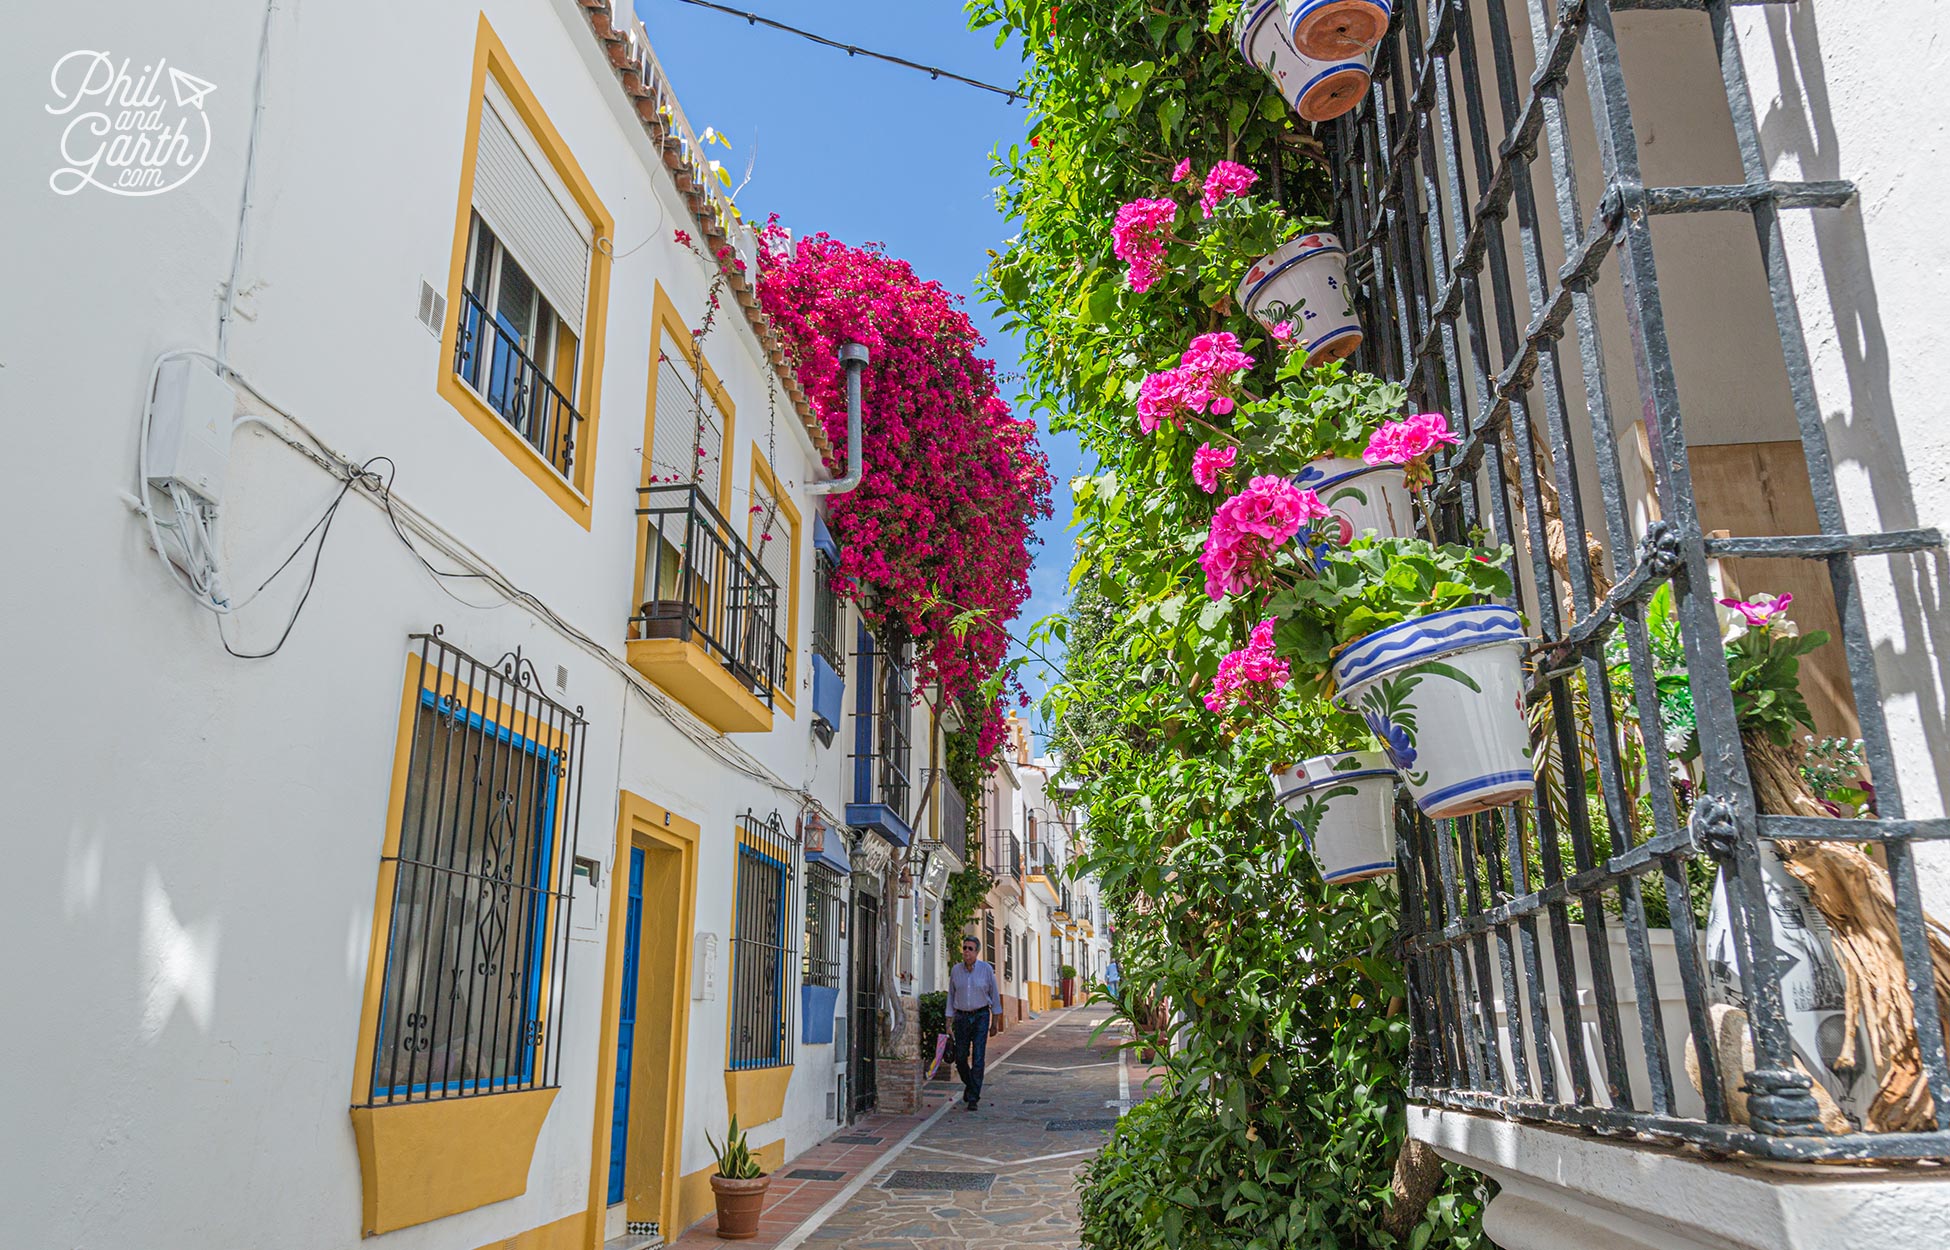 We love the bougainvillea flowers tumbling down to the streets